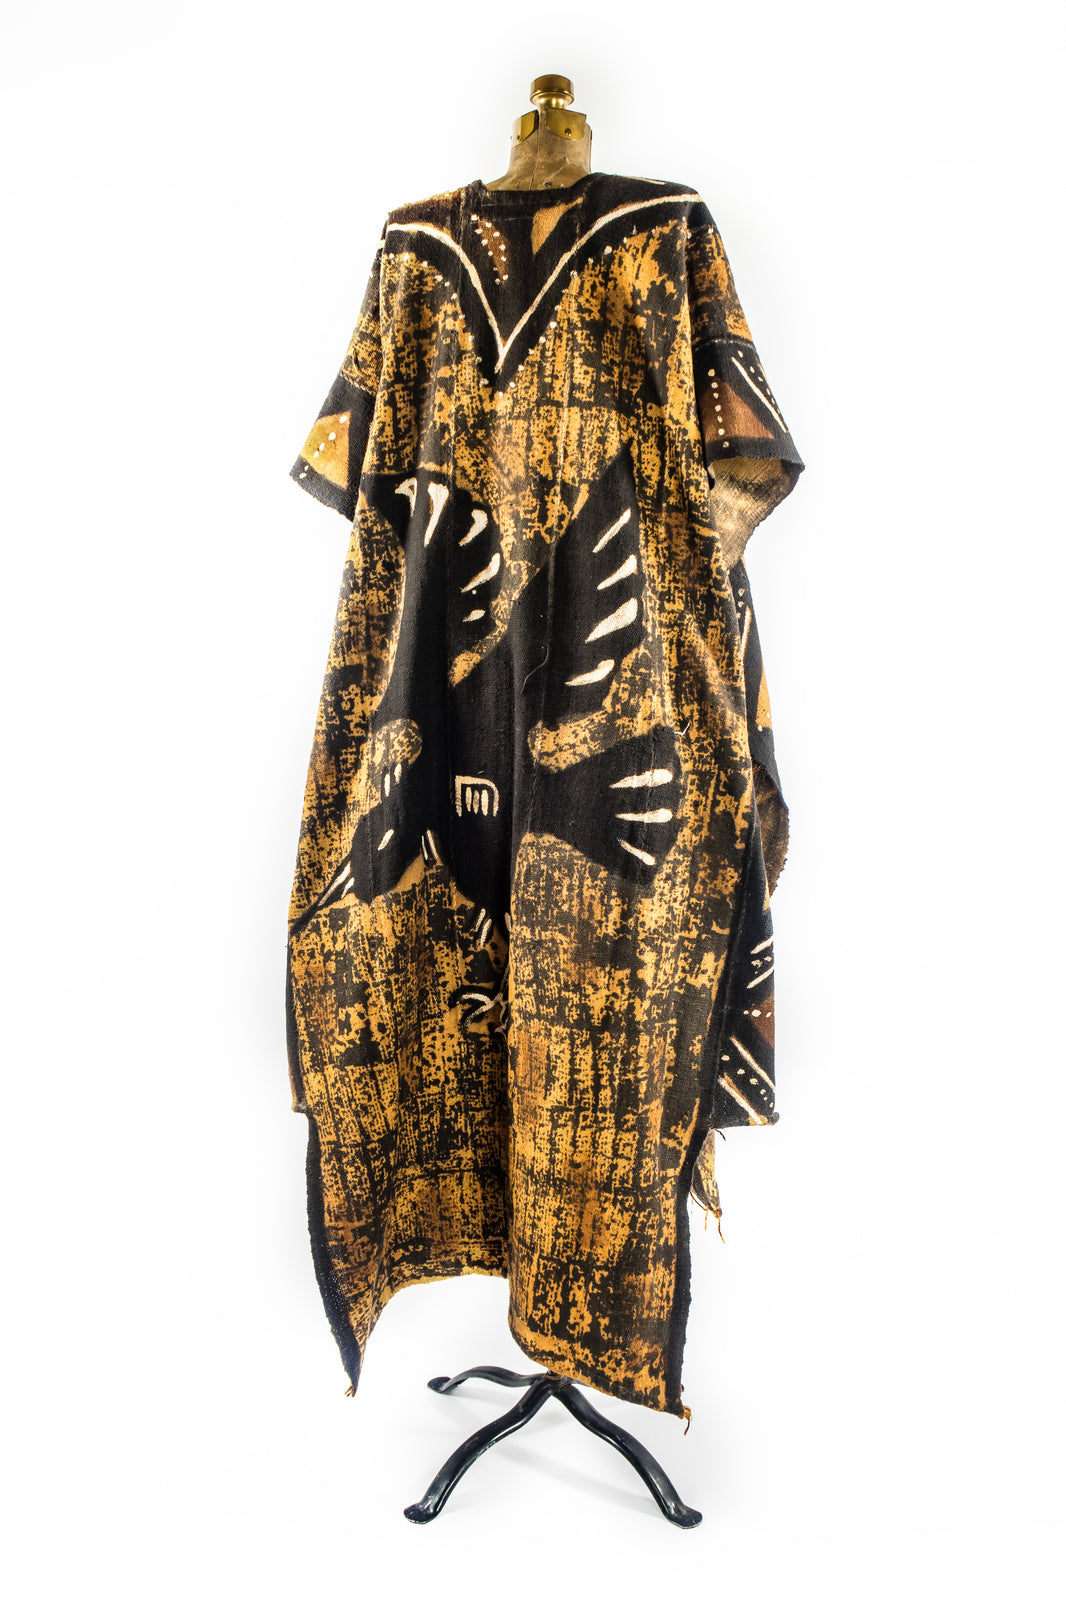 Handcrafted Mudcloth Clothing - African Plural Art - African Art - Clothing - Apparel Accessories - African Cotton Bogolan Textile, Mudcloth Poncho, Handcrafted, West African